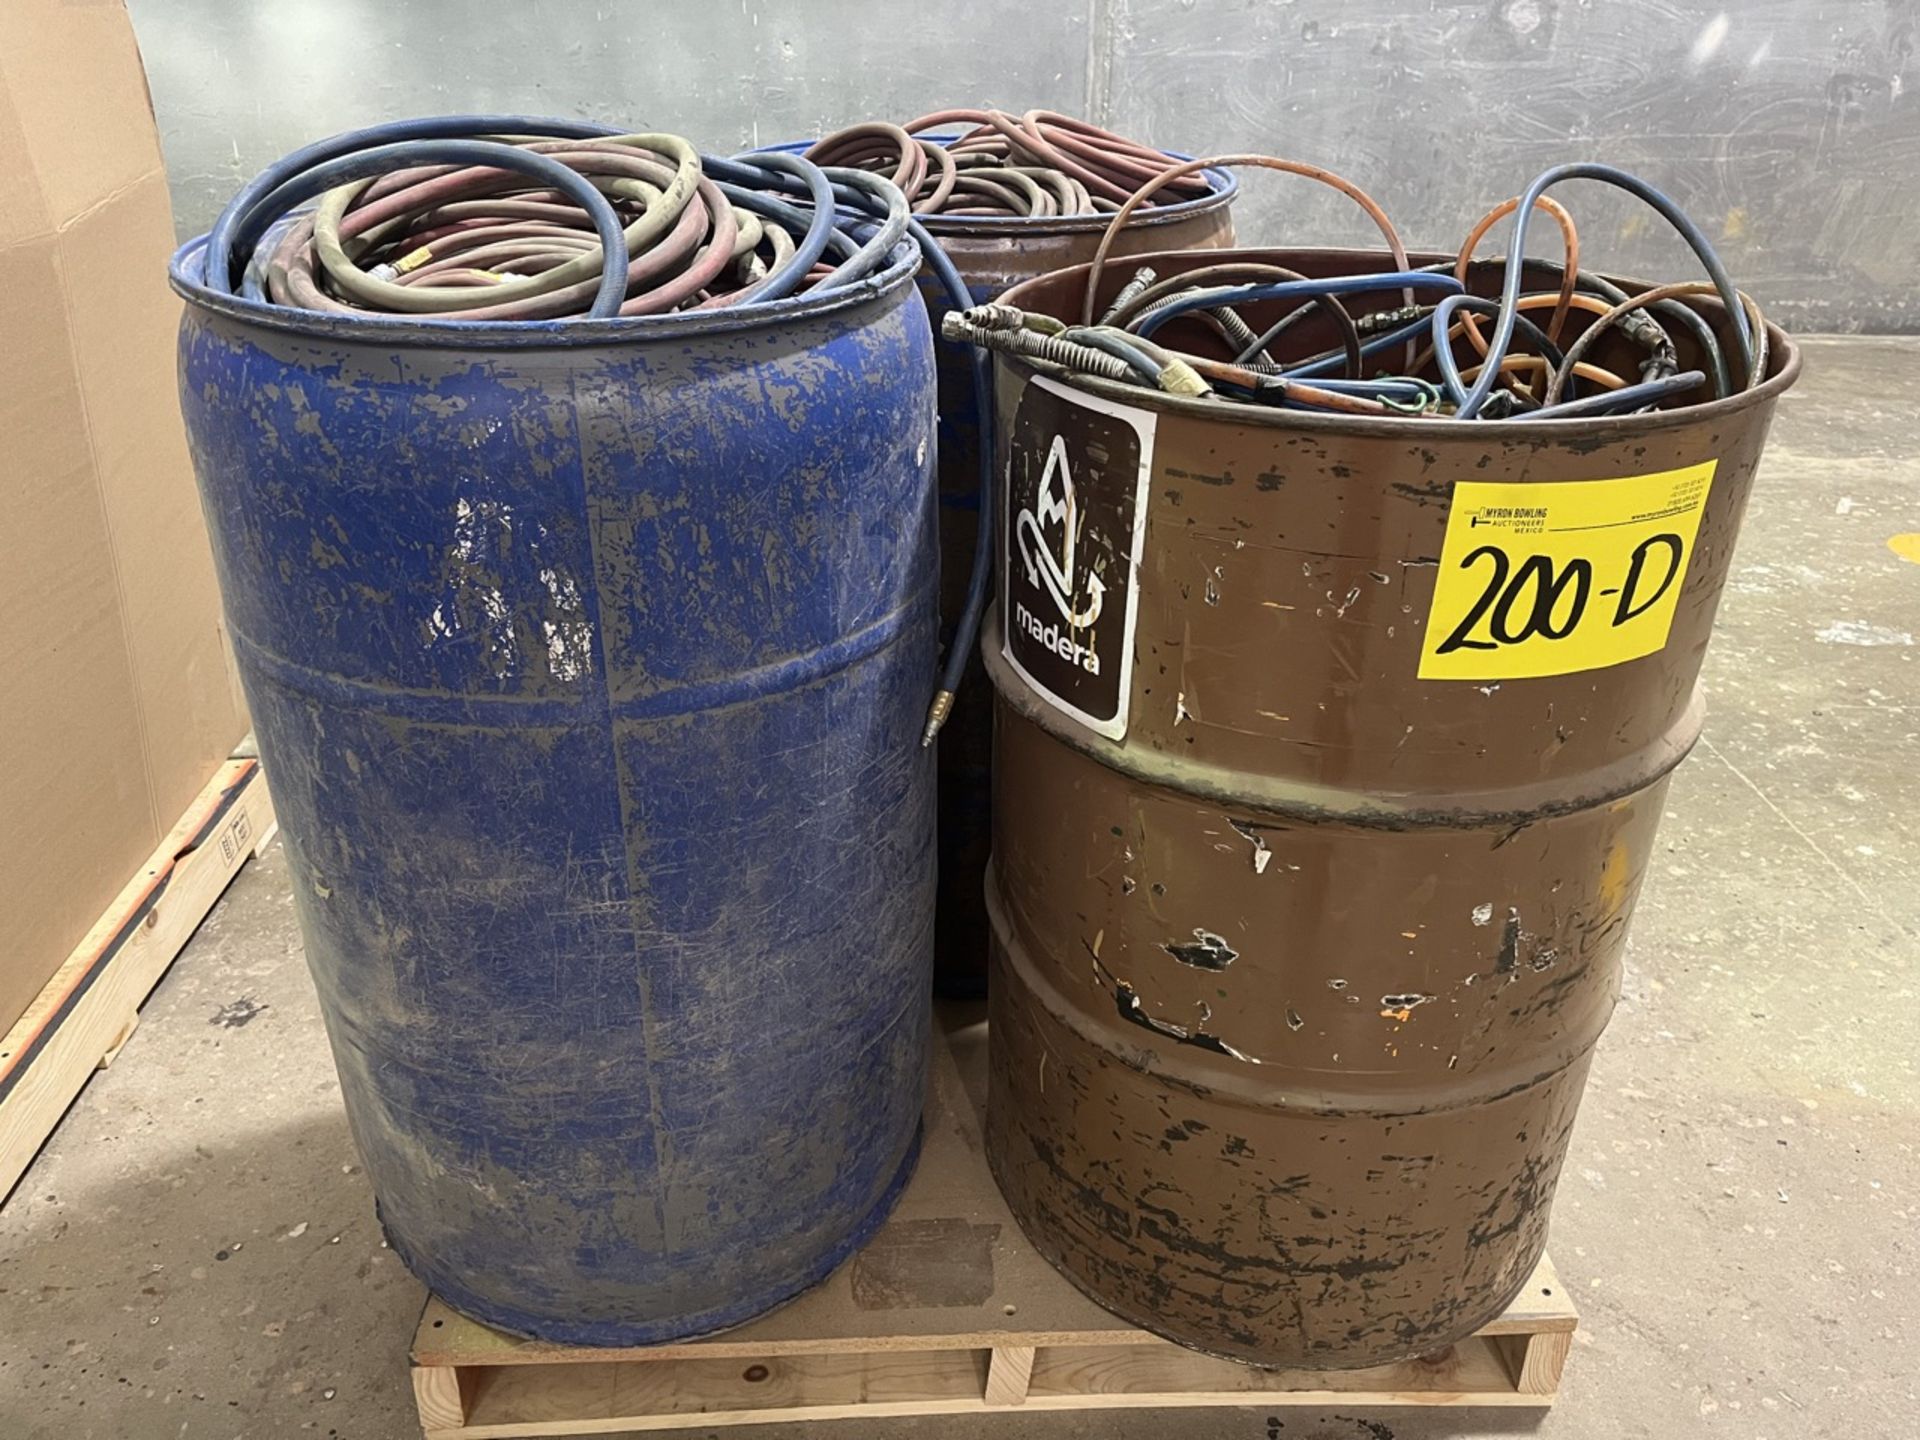 Lot of 3 drums with pneumatic hoses of different gauges and measures, please inspect. / Lote de 3 t